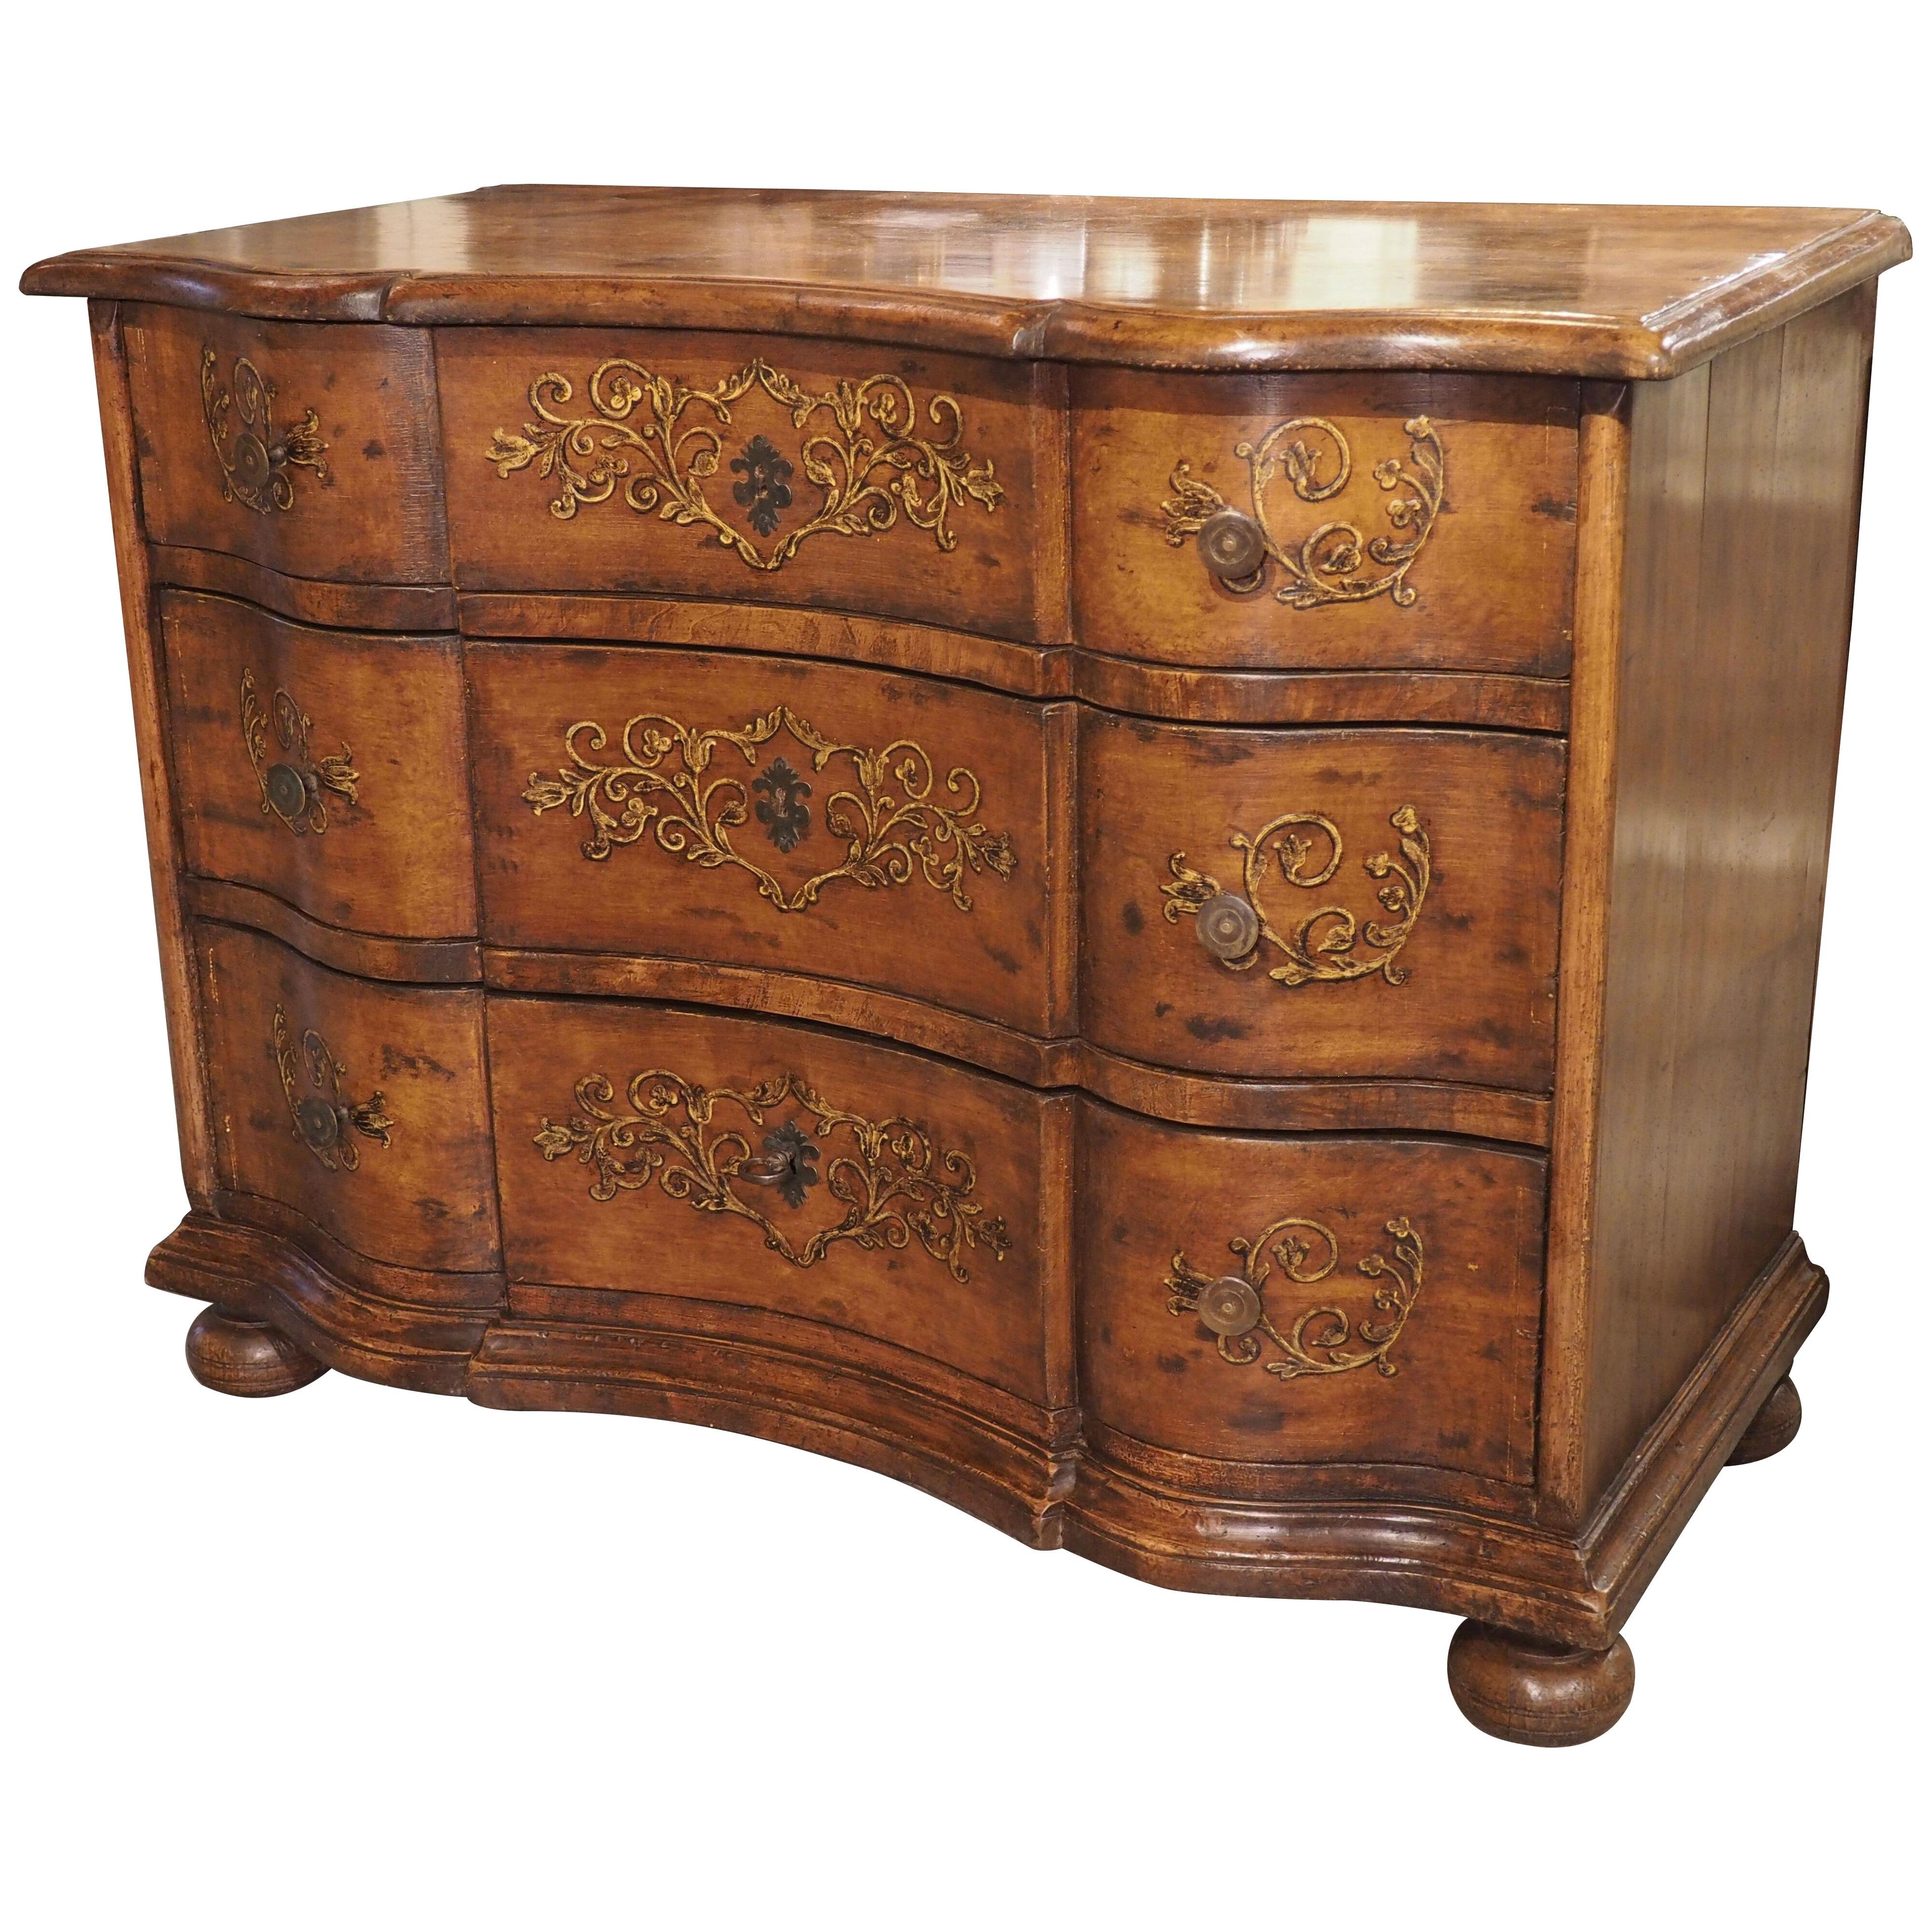 Antique Commode “Balestra” with Gilt Painted Drawer Fronts from Northern Italy